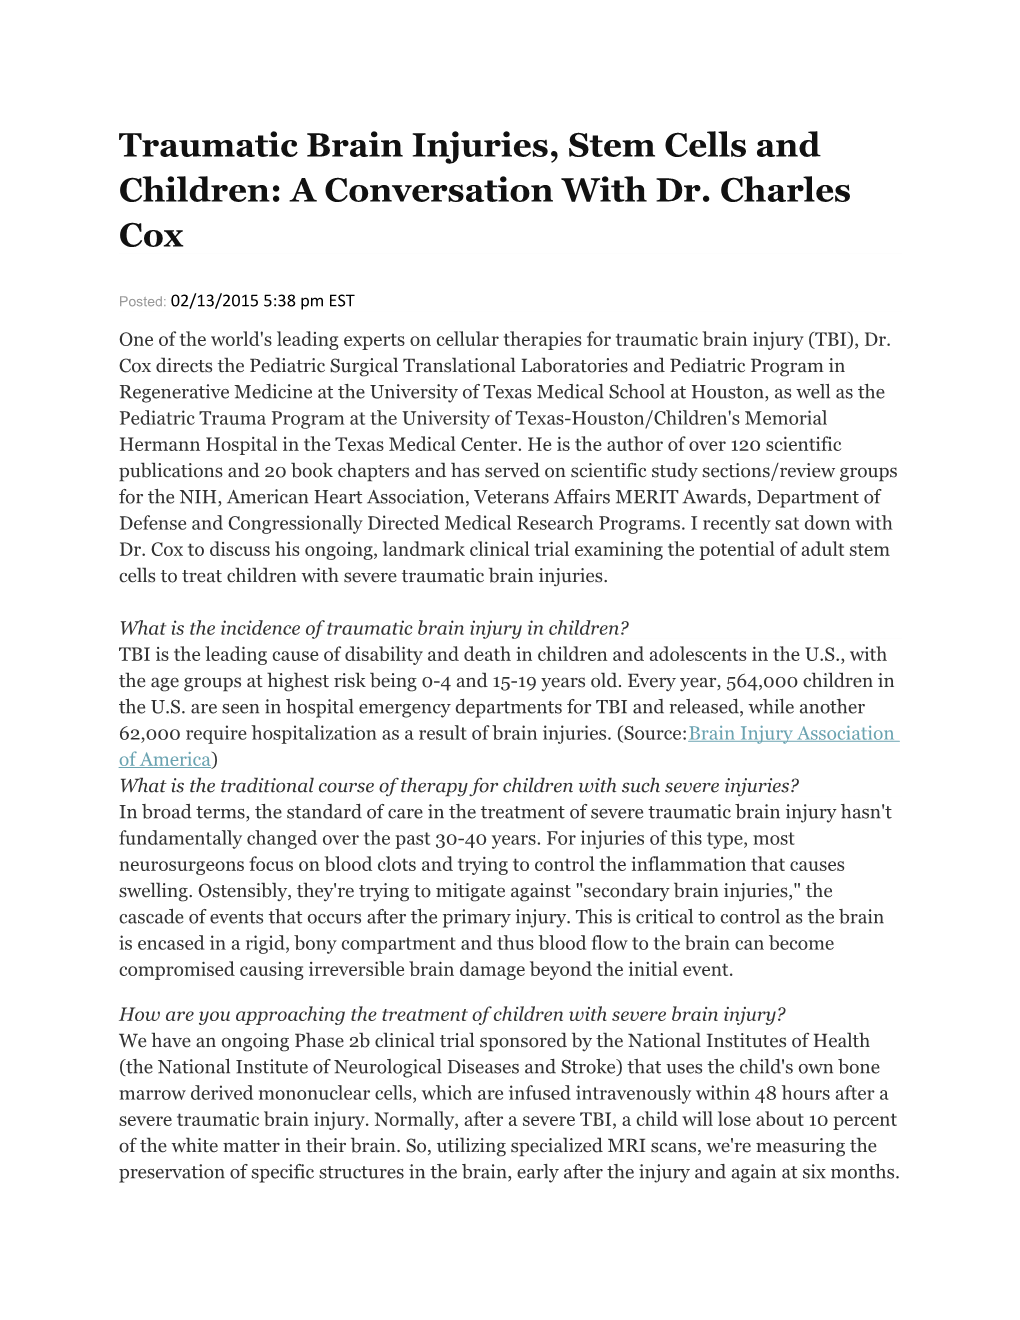 Traumatic Brain Injuries, Stem Cells and Children: a Conversation with Dr. Charles Cox